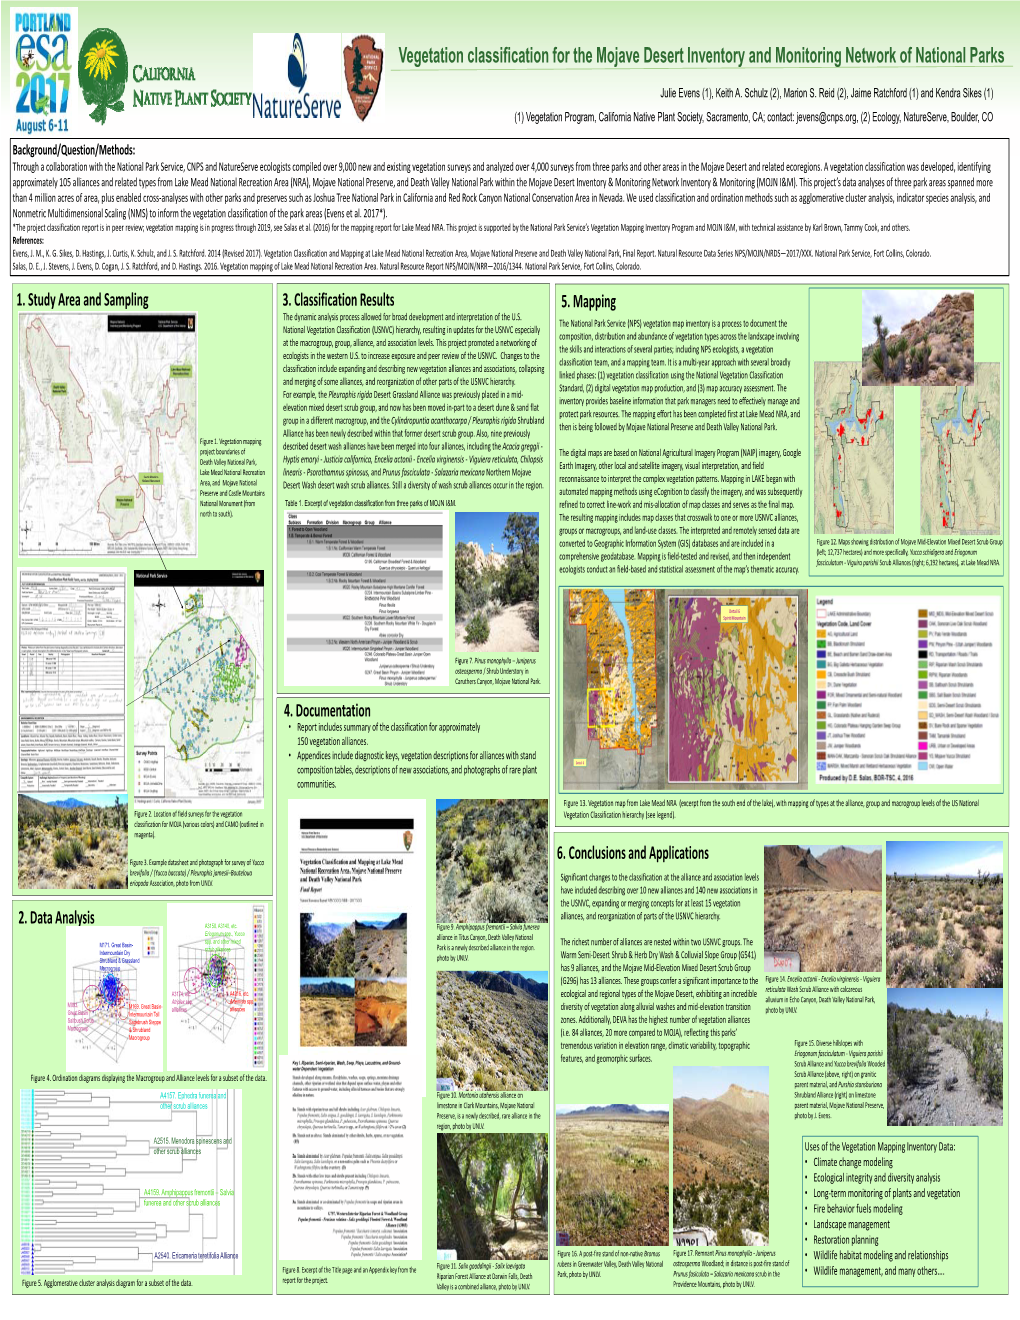 Vegetation Classification for the Mojave Desert Inventory and Monitoring Network of National Parks